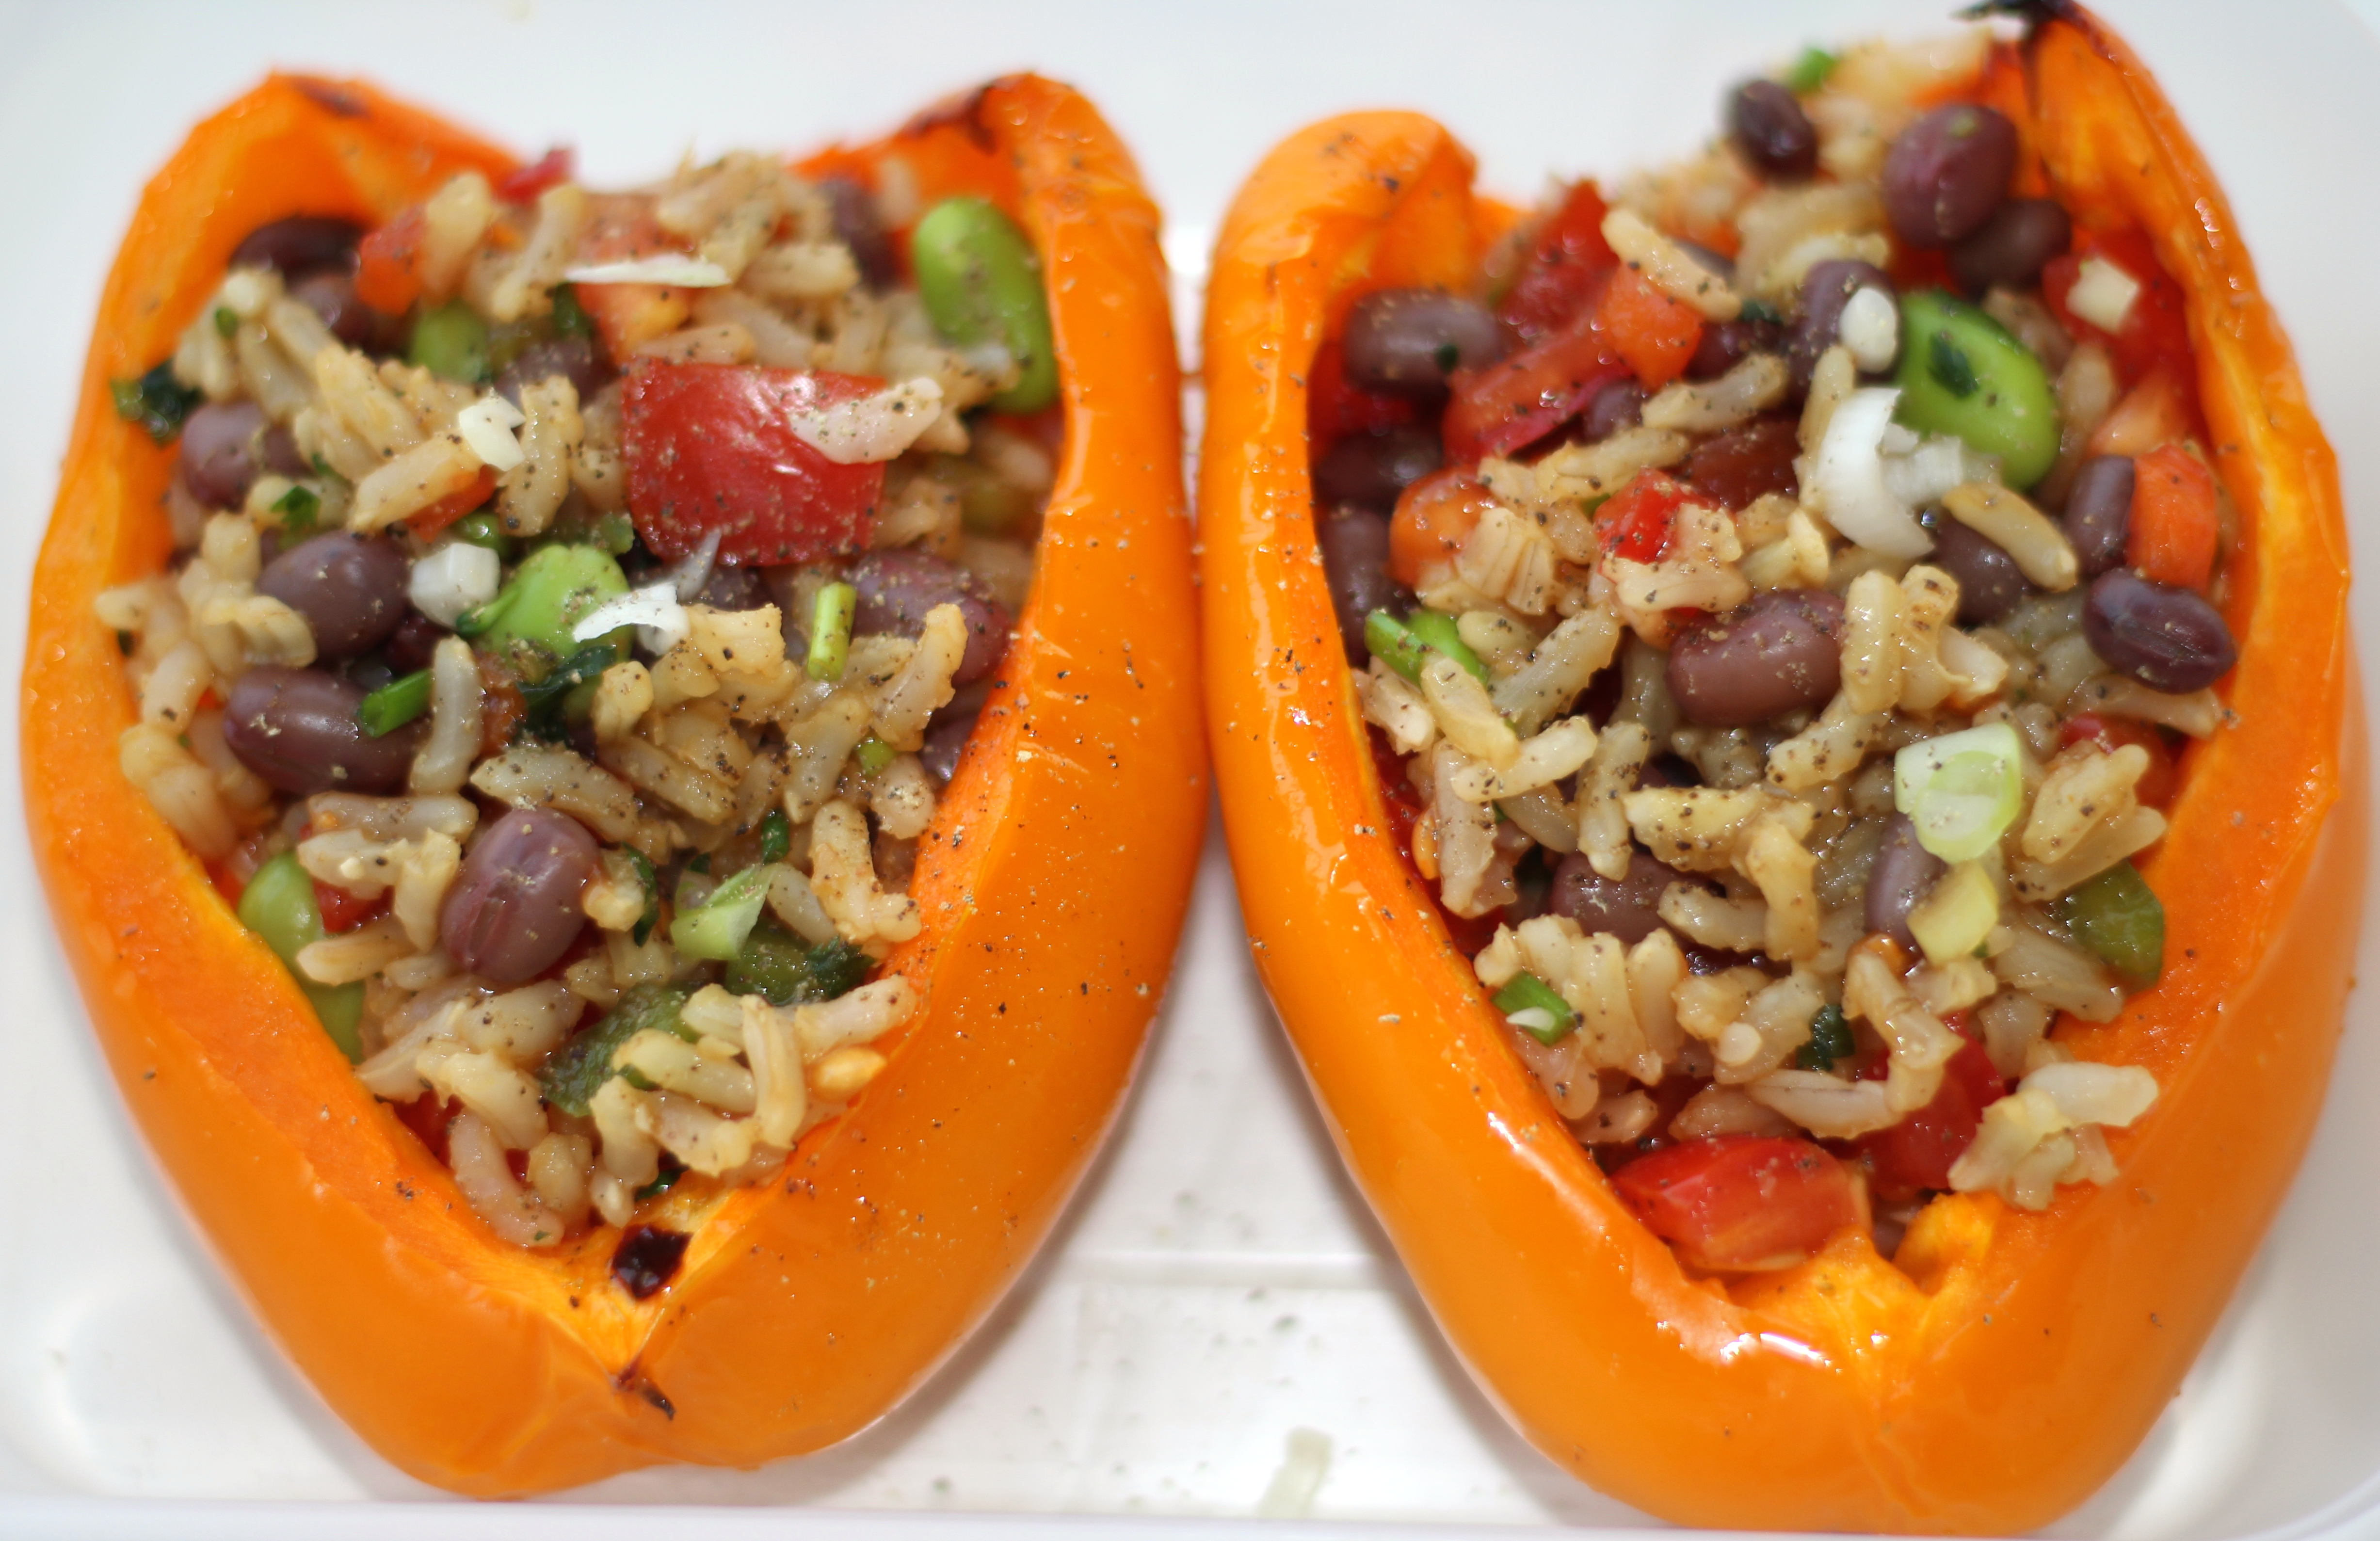 ROASTED PEPPERS STUFFED WITH RICE SALAD